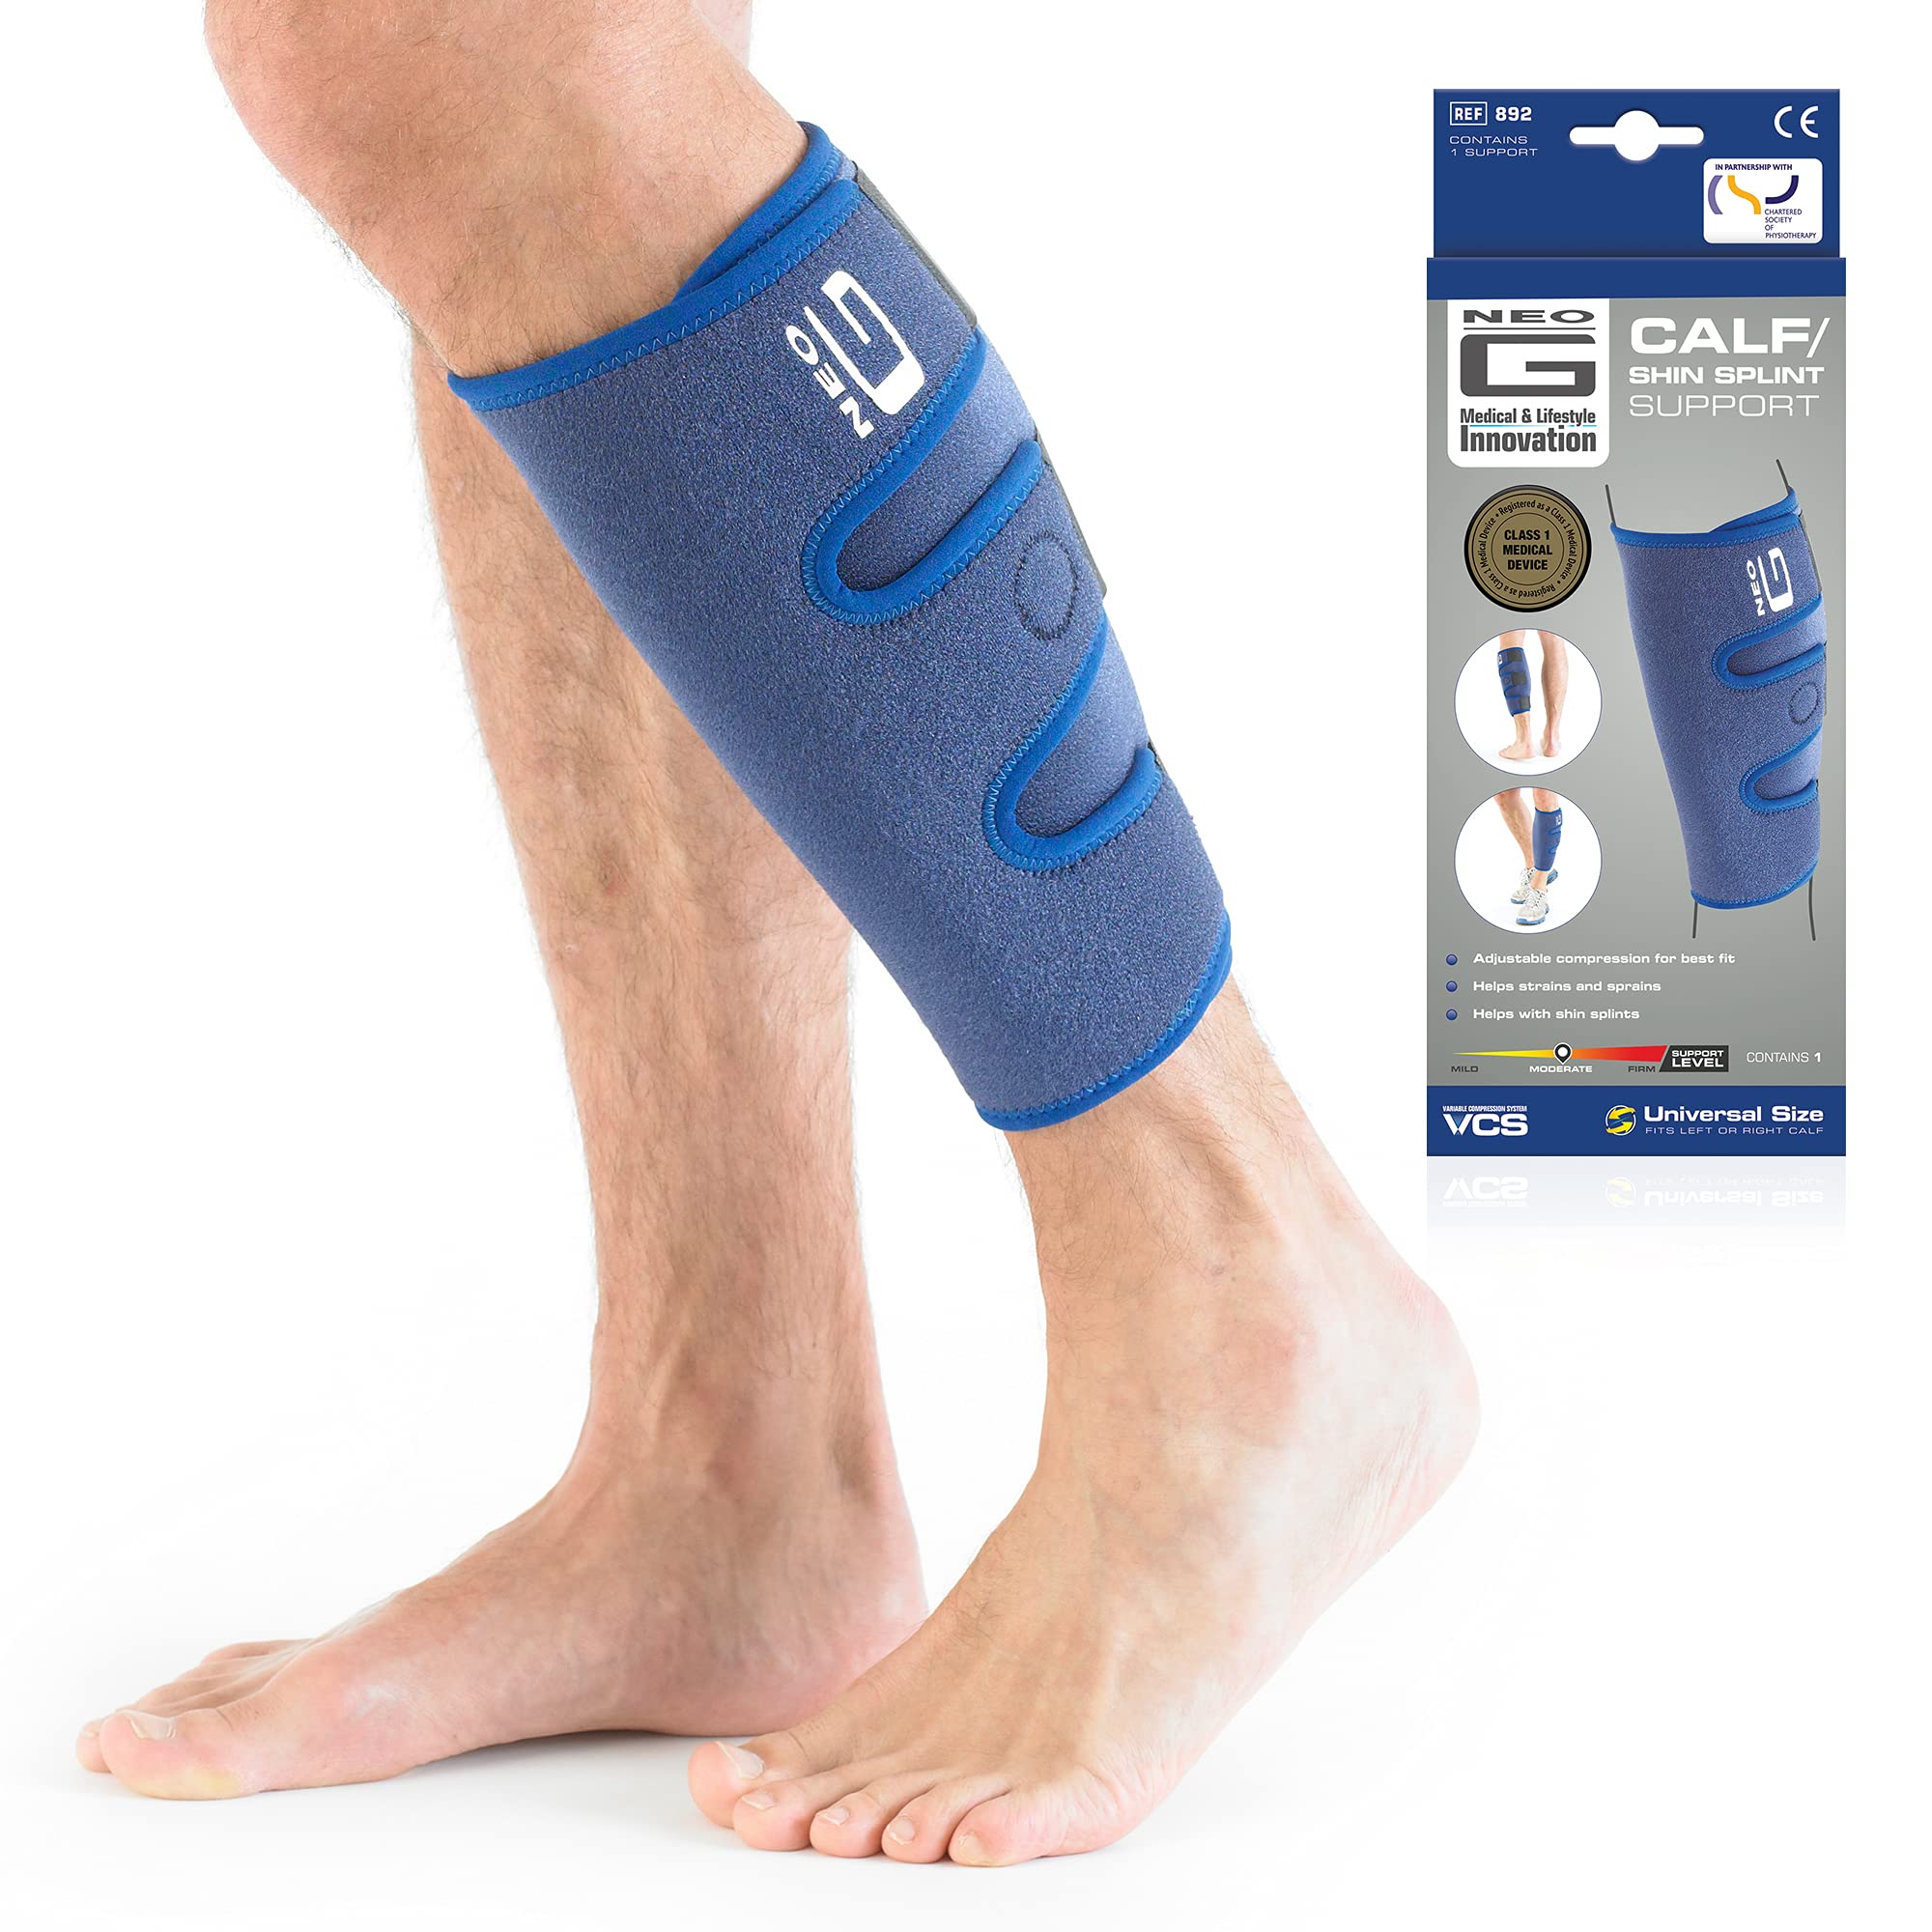 Neo-G Calf Shin Brace Support for Pain Relief from Calf Injury, Shin Splints  Treatment, Sprains, Running, Sports, Recovery - Adjustable Calf Compression  Sleeve Men Women - Class 1 Medical Device